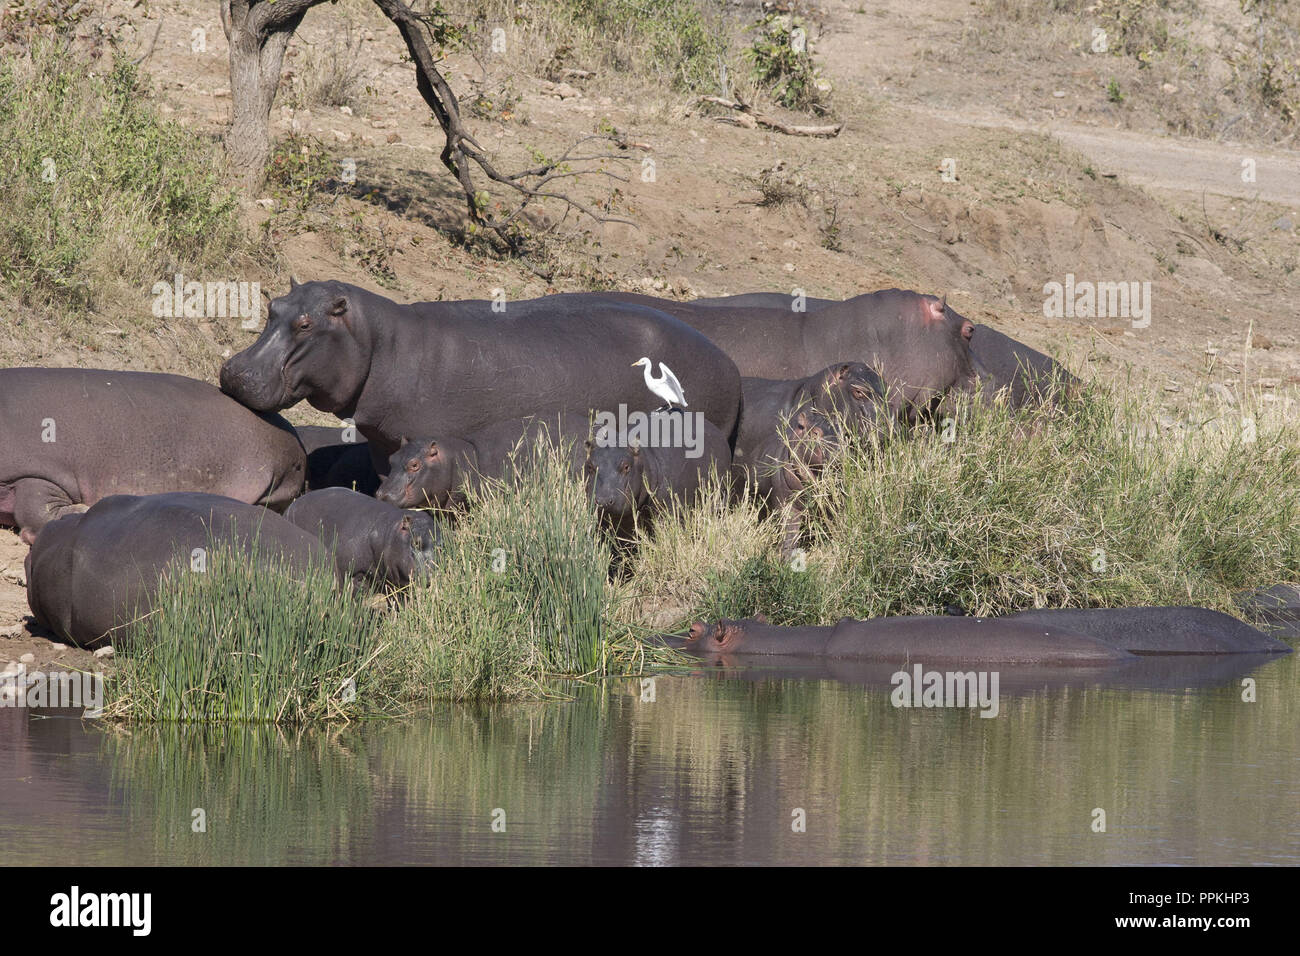 An Egret sits on Hippos resting near the water Stock Photo